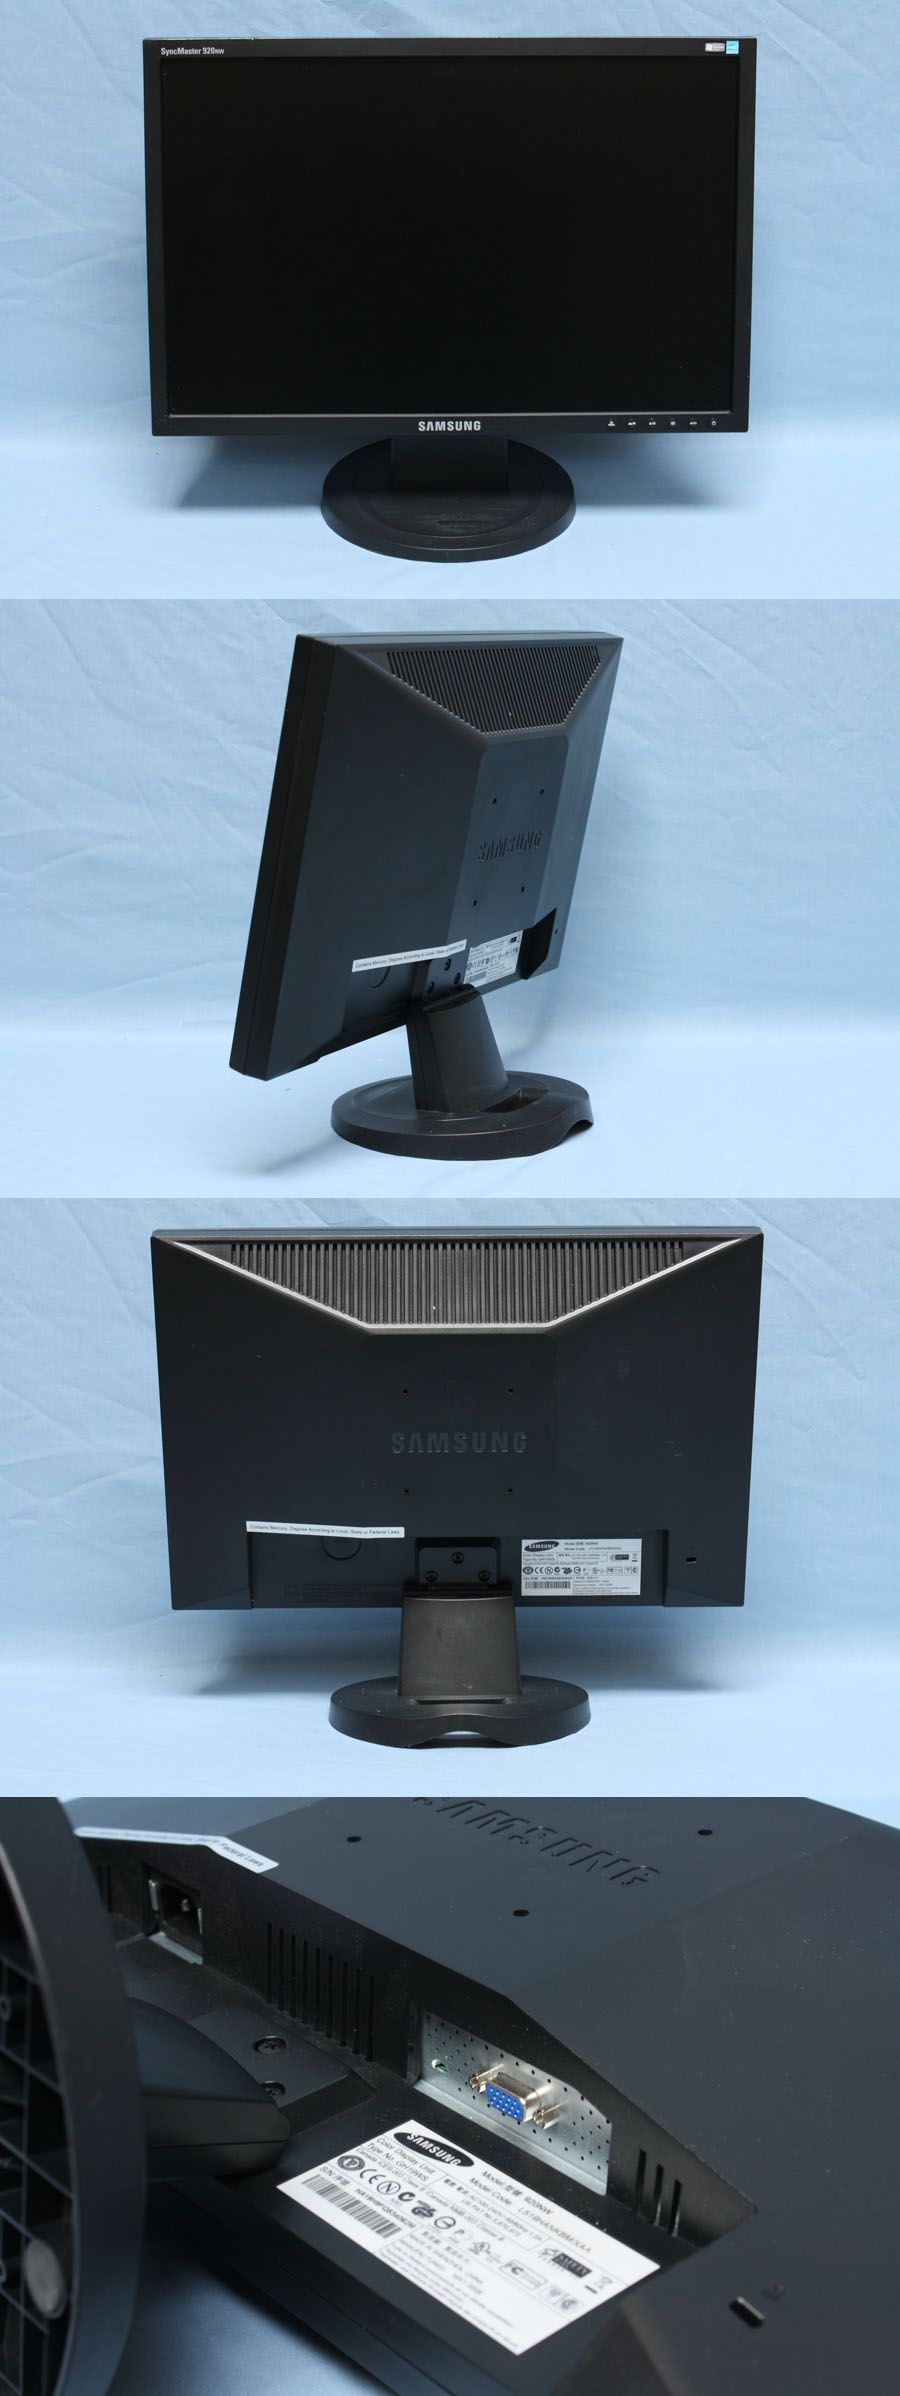 Samsung SyncMaster 920NW 19 LCD PC Computer Monitor Screen 12